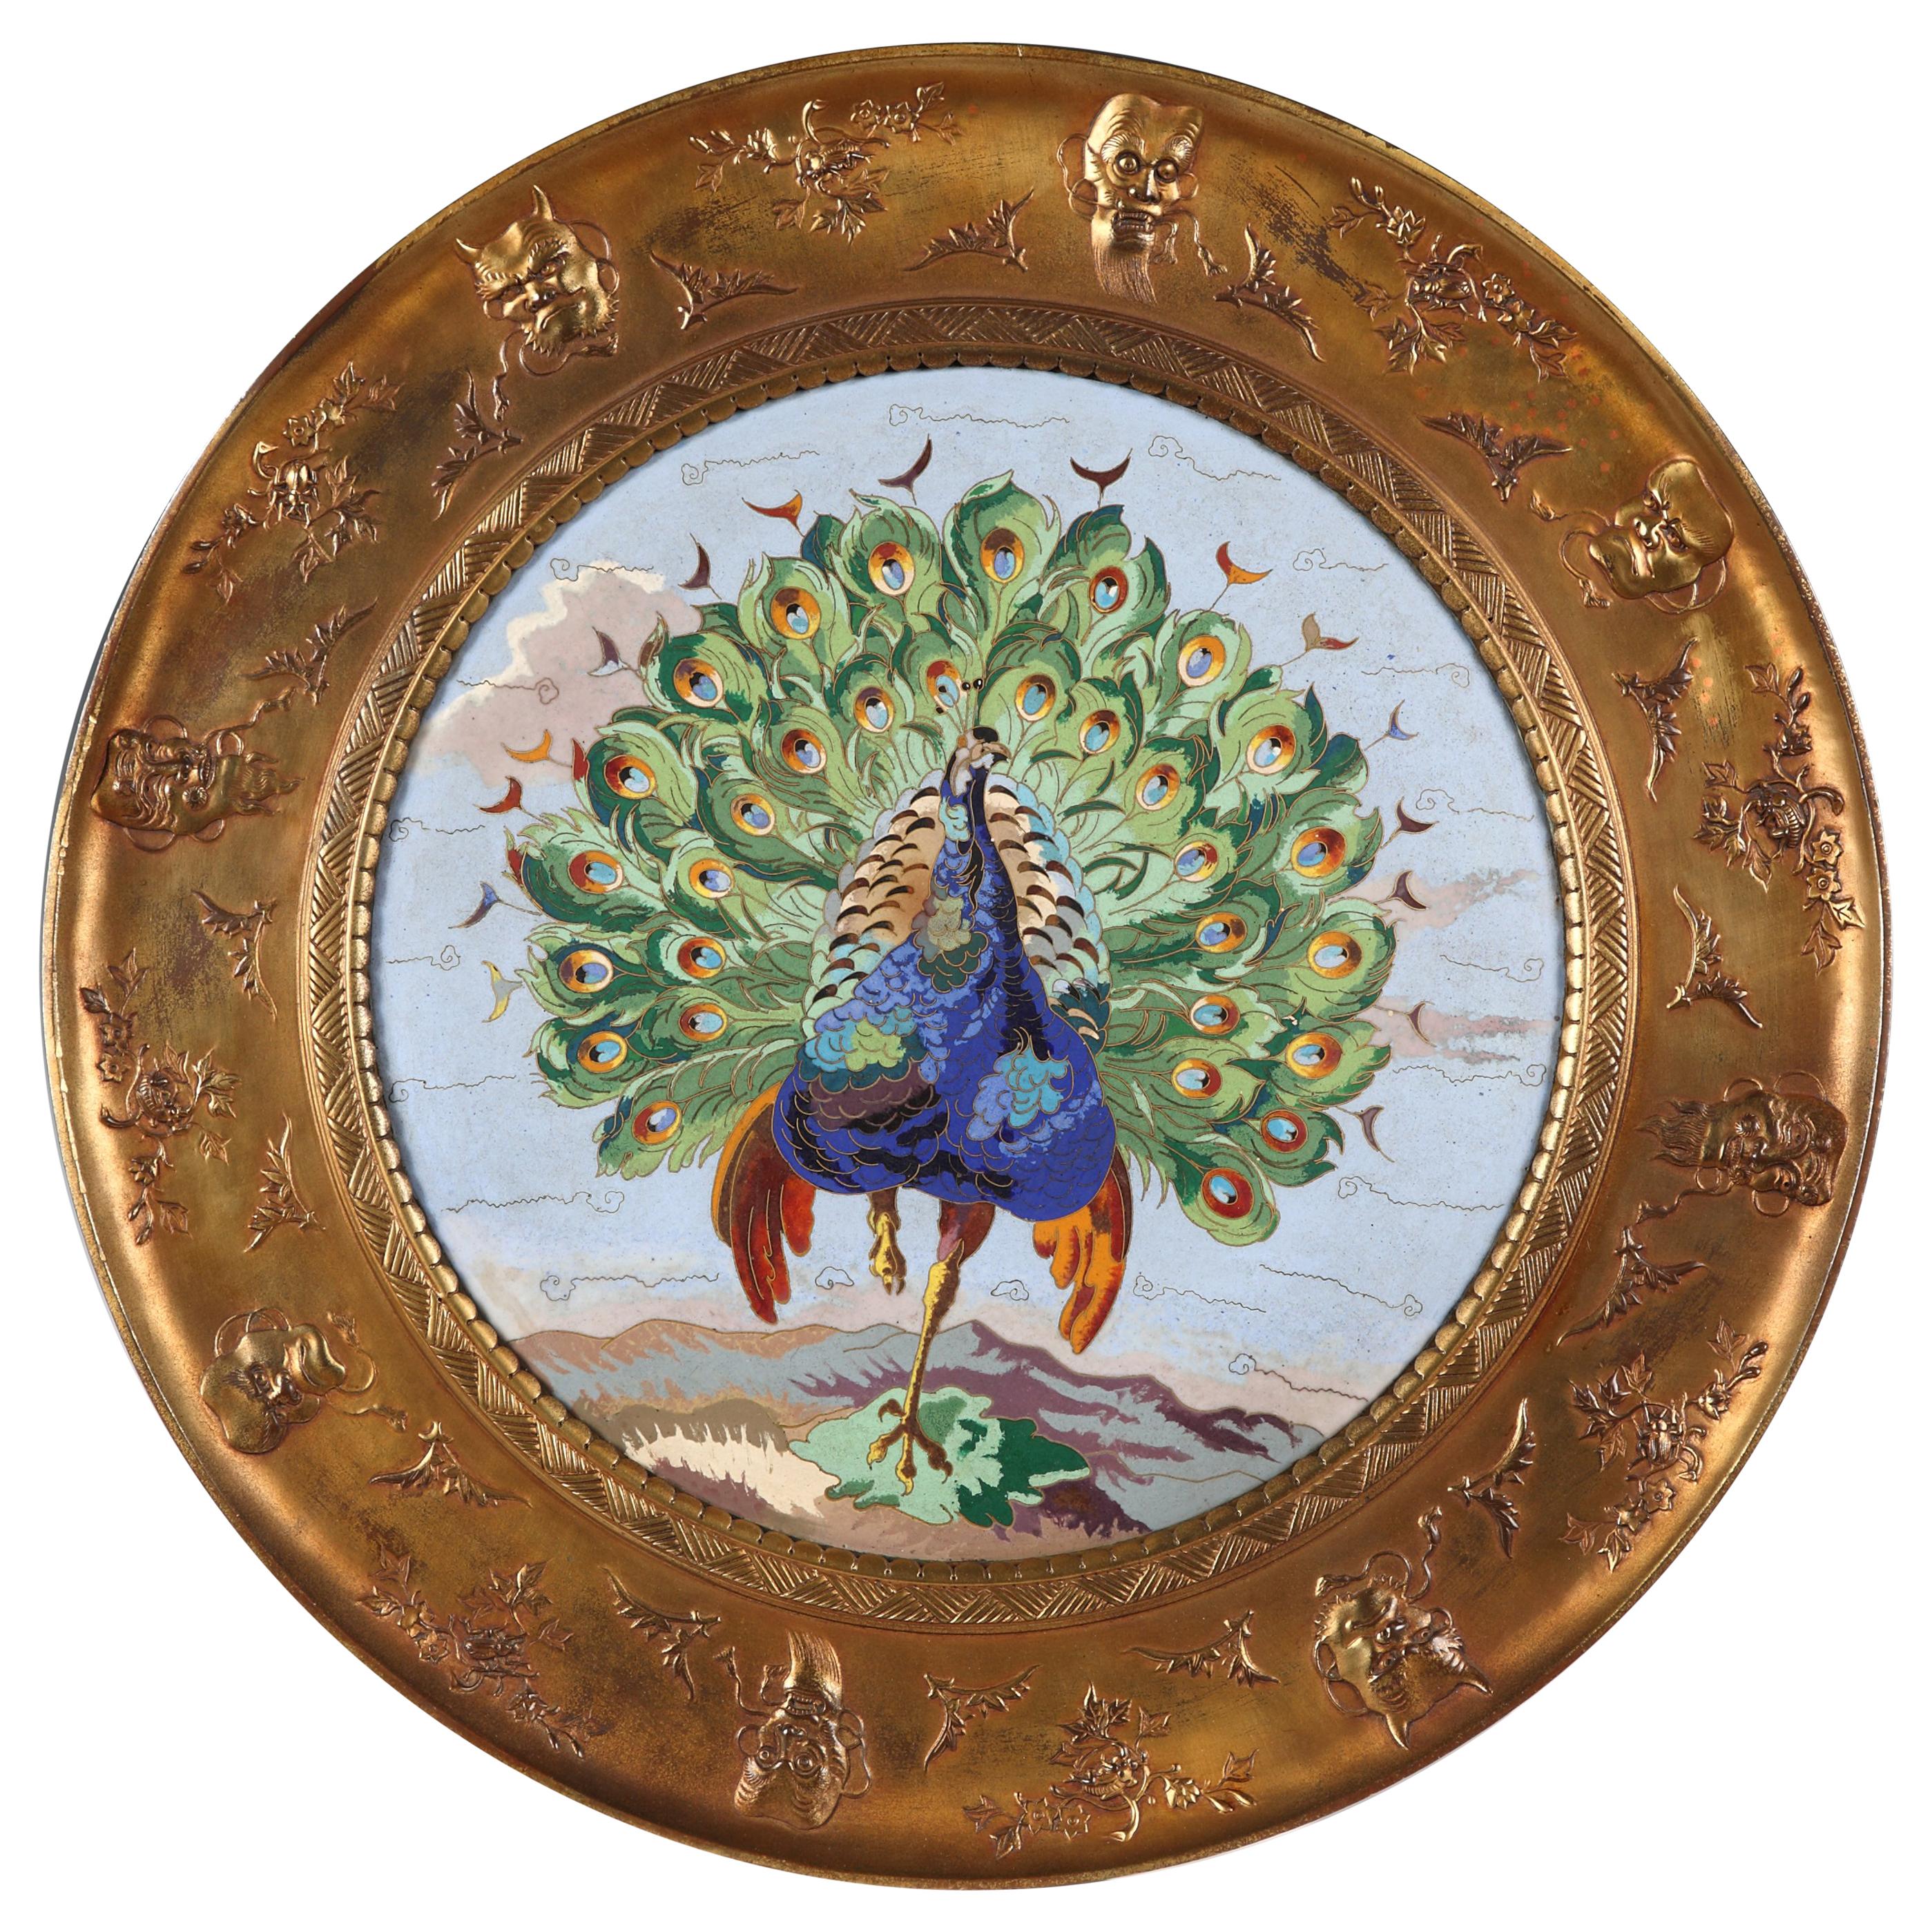 Aesthetic Movement Enameled Plate Attributed to Elkington and A. Willms, c. 1875